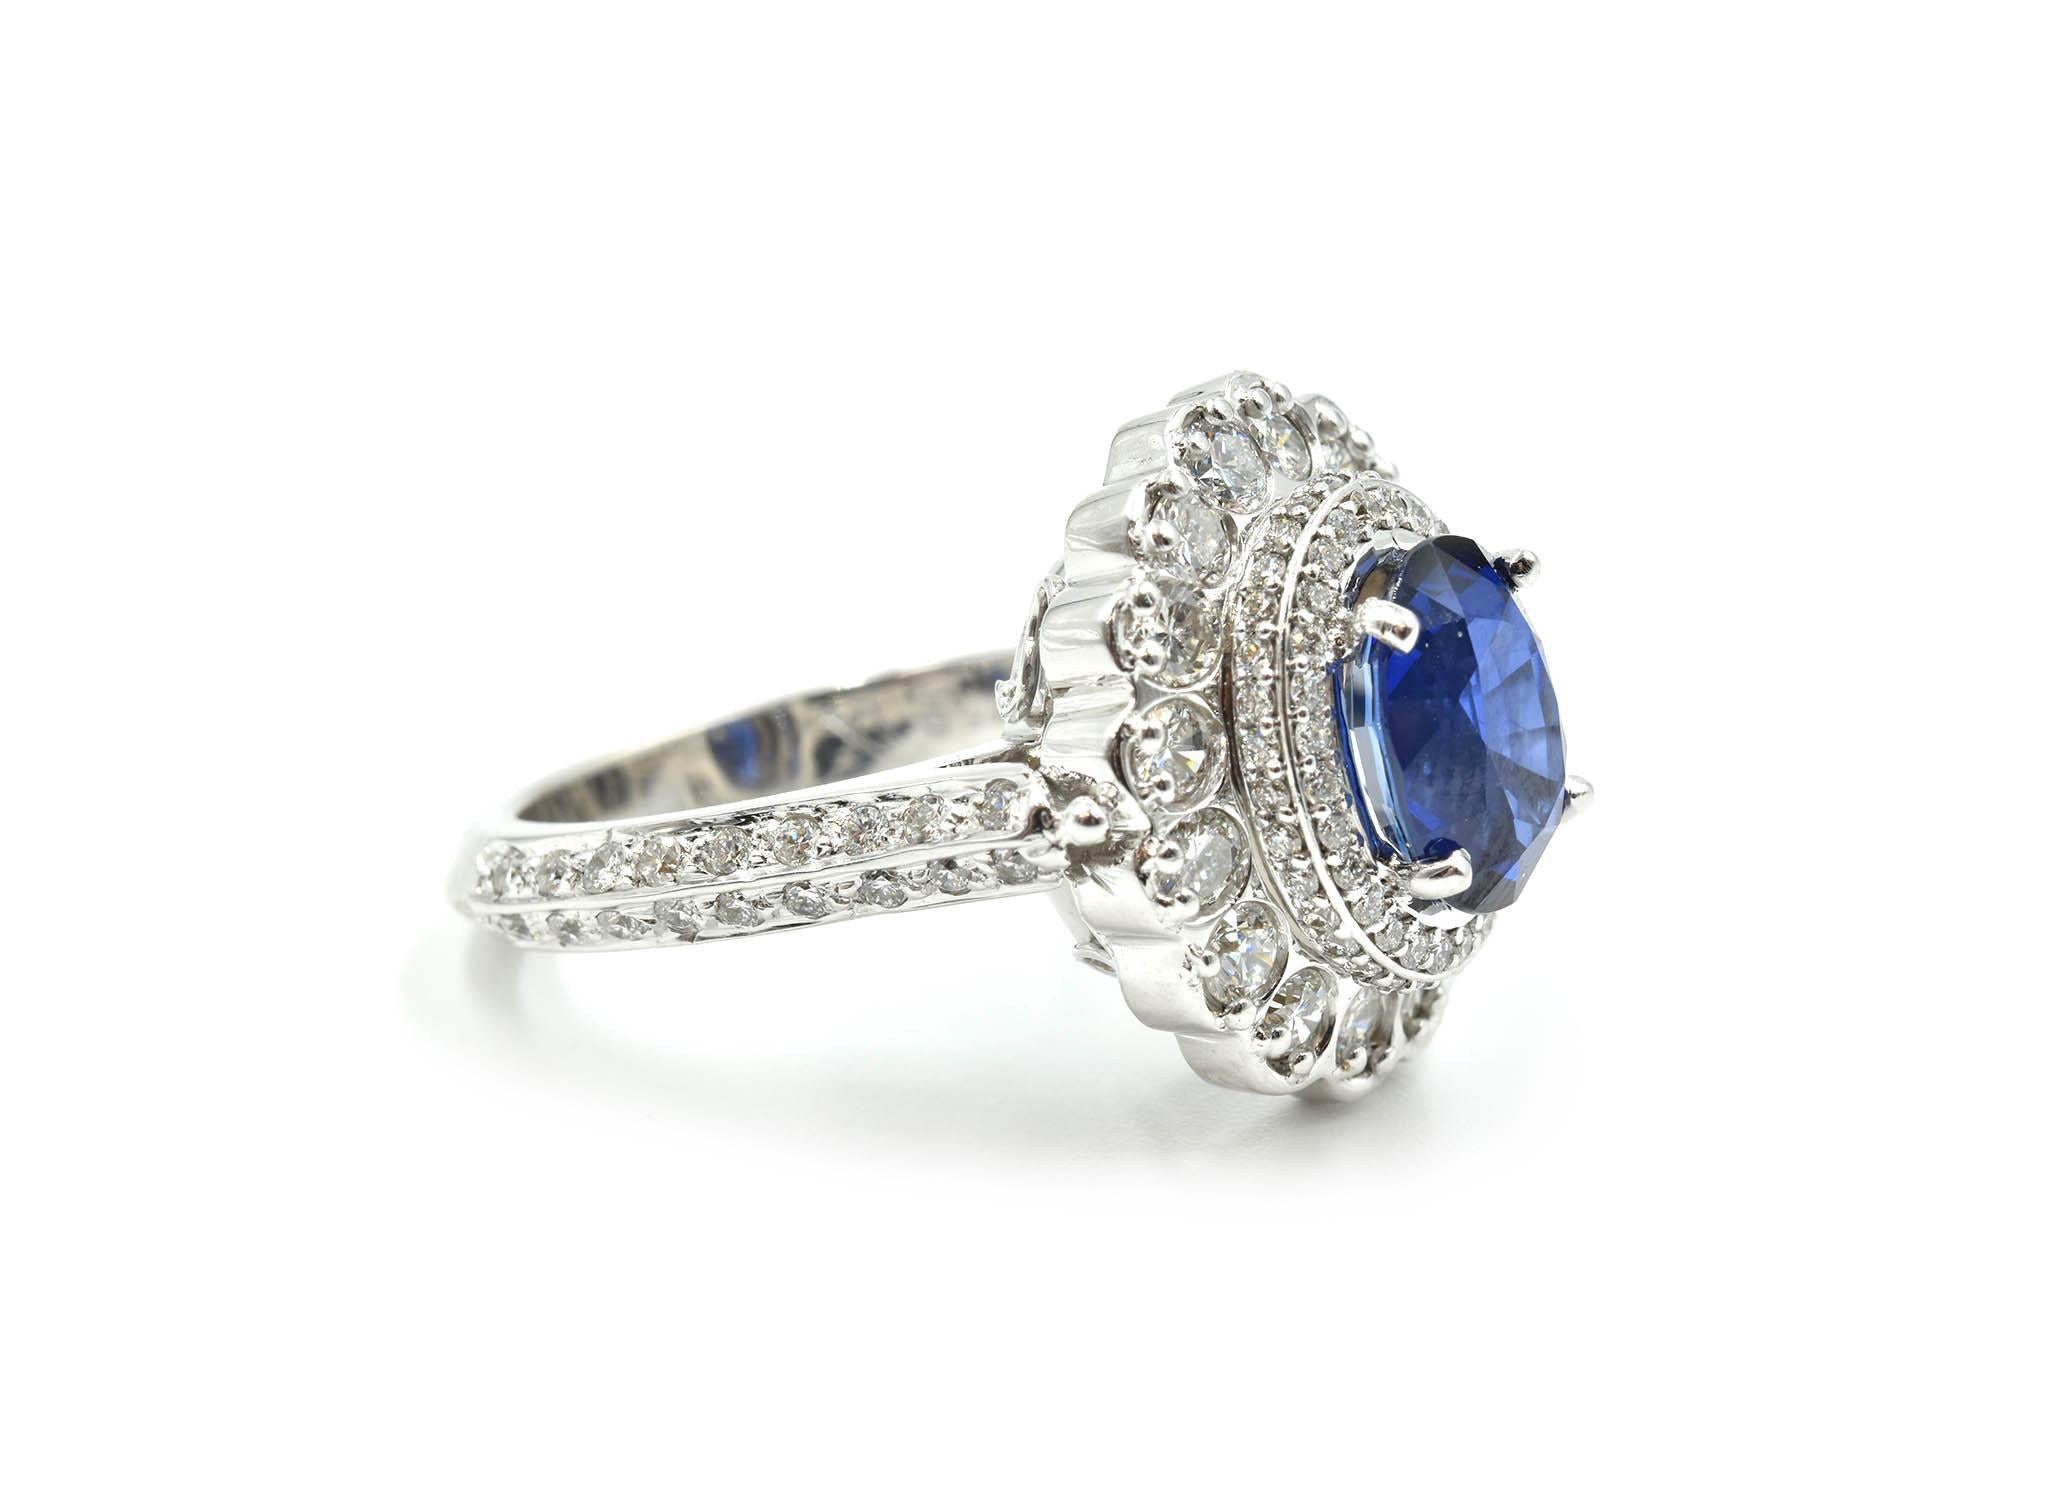 A modern 2.95ct blue sapphire cocktail ring! This untreated and unique blue sapphire has a gorgeous diamond halo and is set in an intricately-crafted mounting! The detailed shank is crafted from 14k white gold dual rows of diamonds set in the